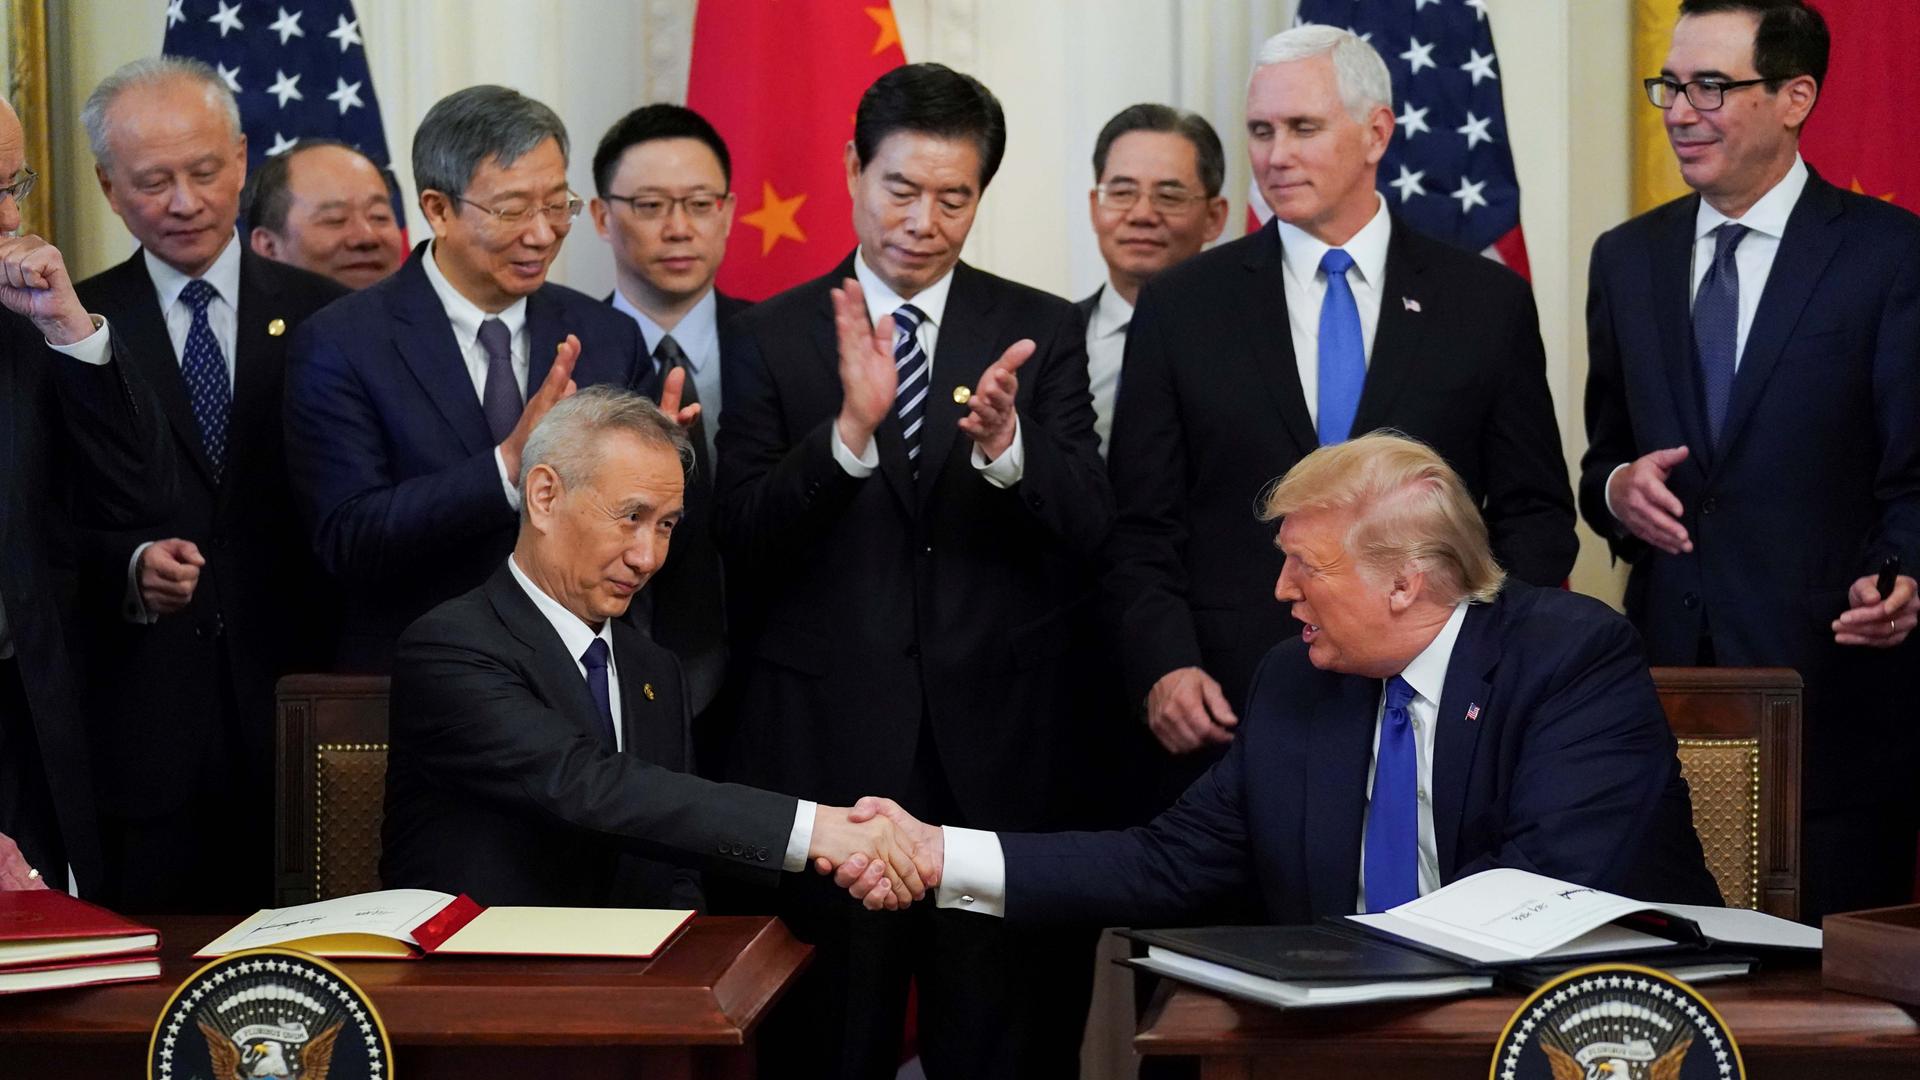 Chinese Vice Premier Liu He and US President Donald Trump shake hands after signing phase one of the US-China trade agreement during a ceremony in the East Room of the White House in Washington, DC, on January 15, 2020.